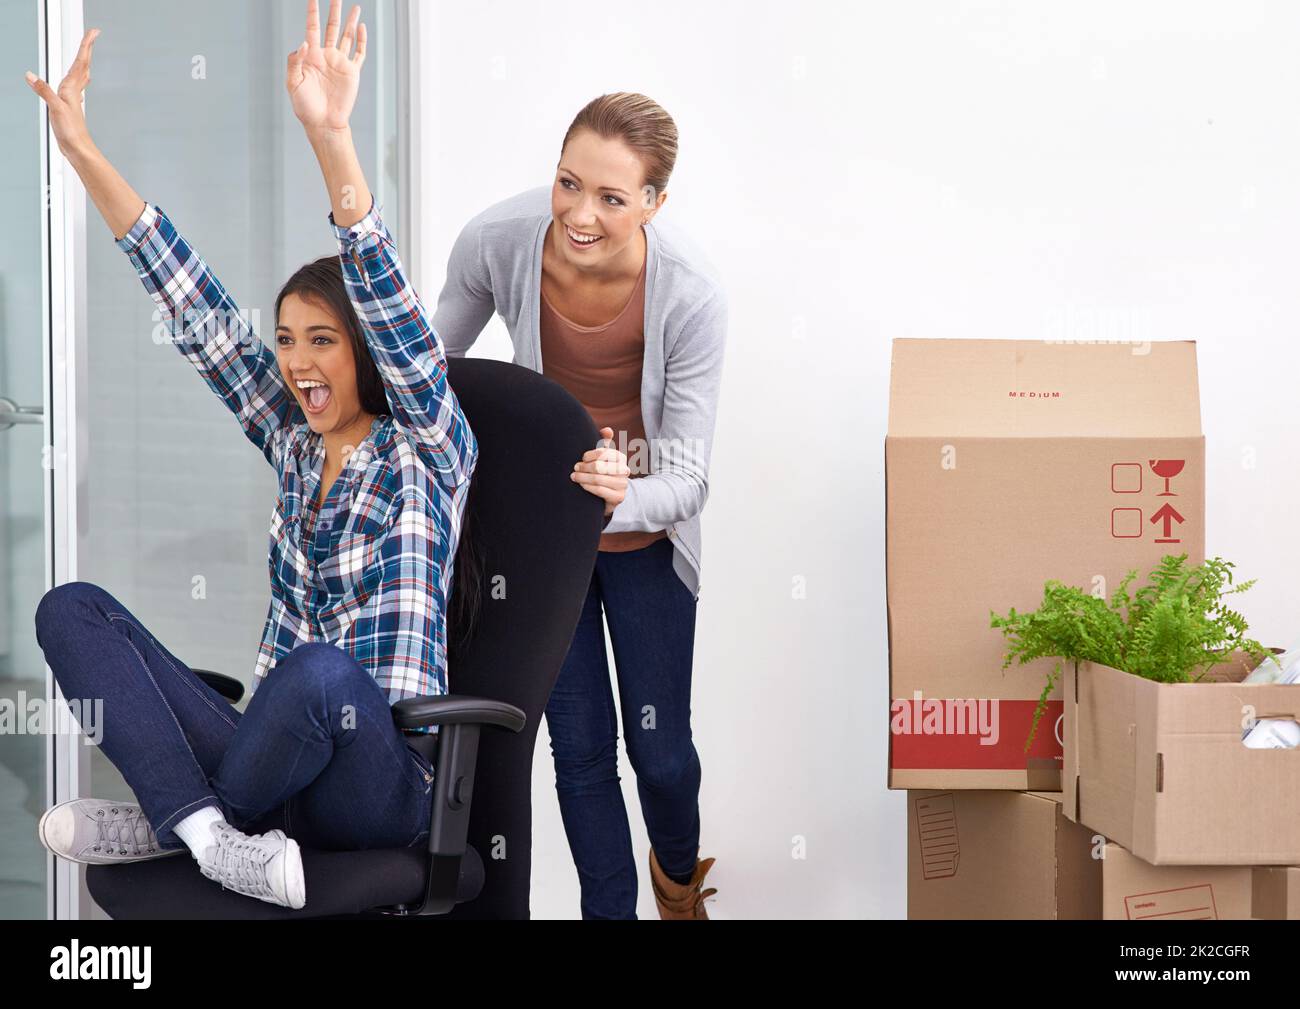 The excitement of moving is in the air. Shot of two female entrepreneurs moving into a new office. Stock Photo